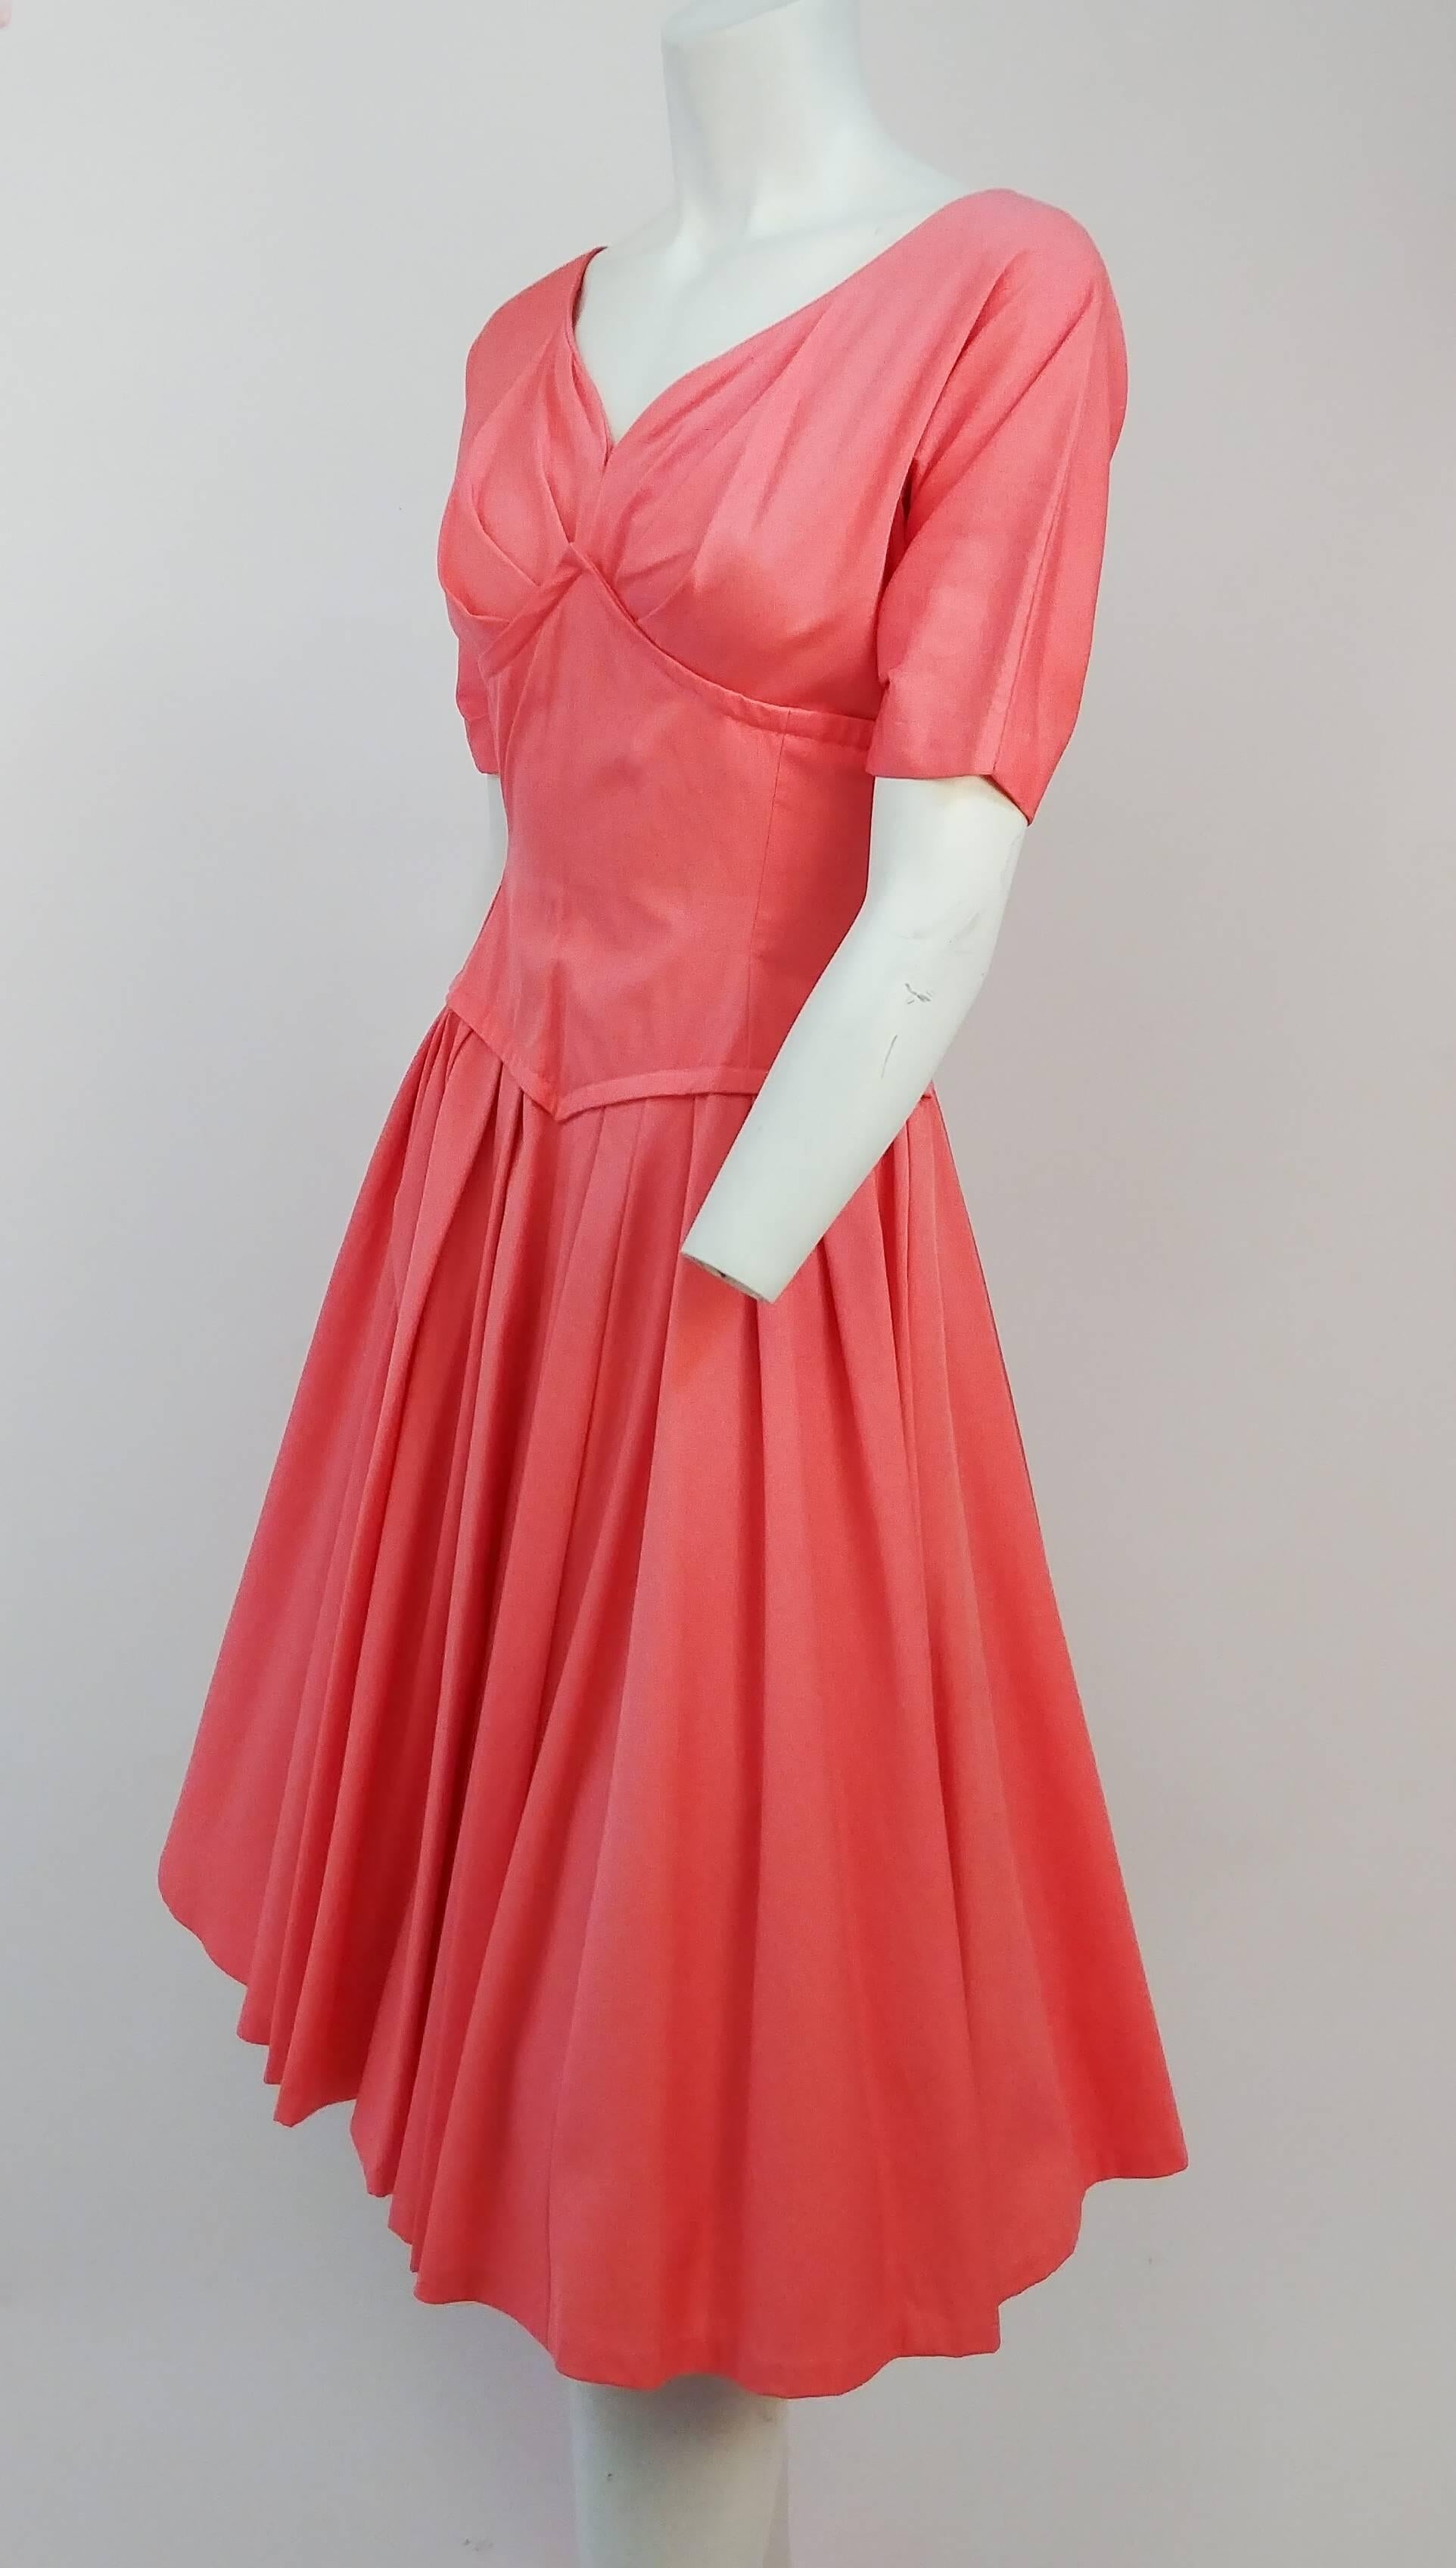 50s Salmon Pink A-Line Dress. Pleated skirt details. Interesting corset-shaped bodice. Zips up back. Dress shown over a petticoat in photo for additional support.